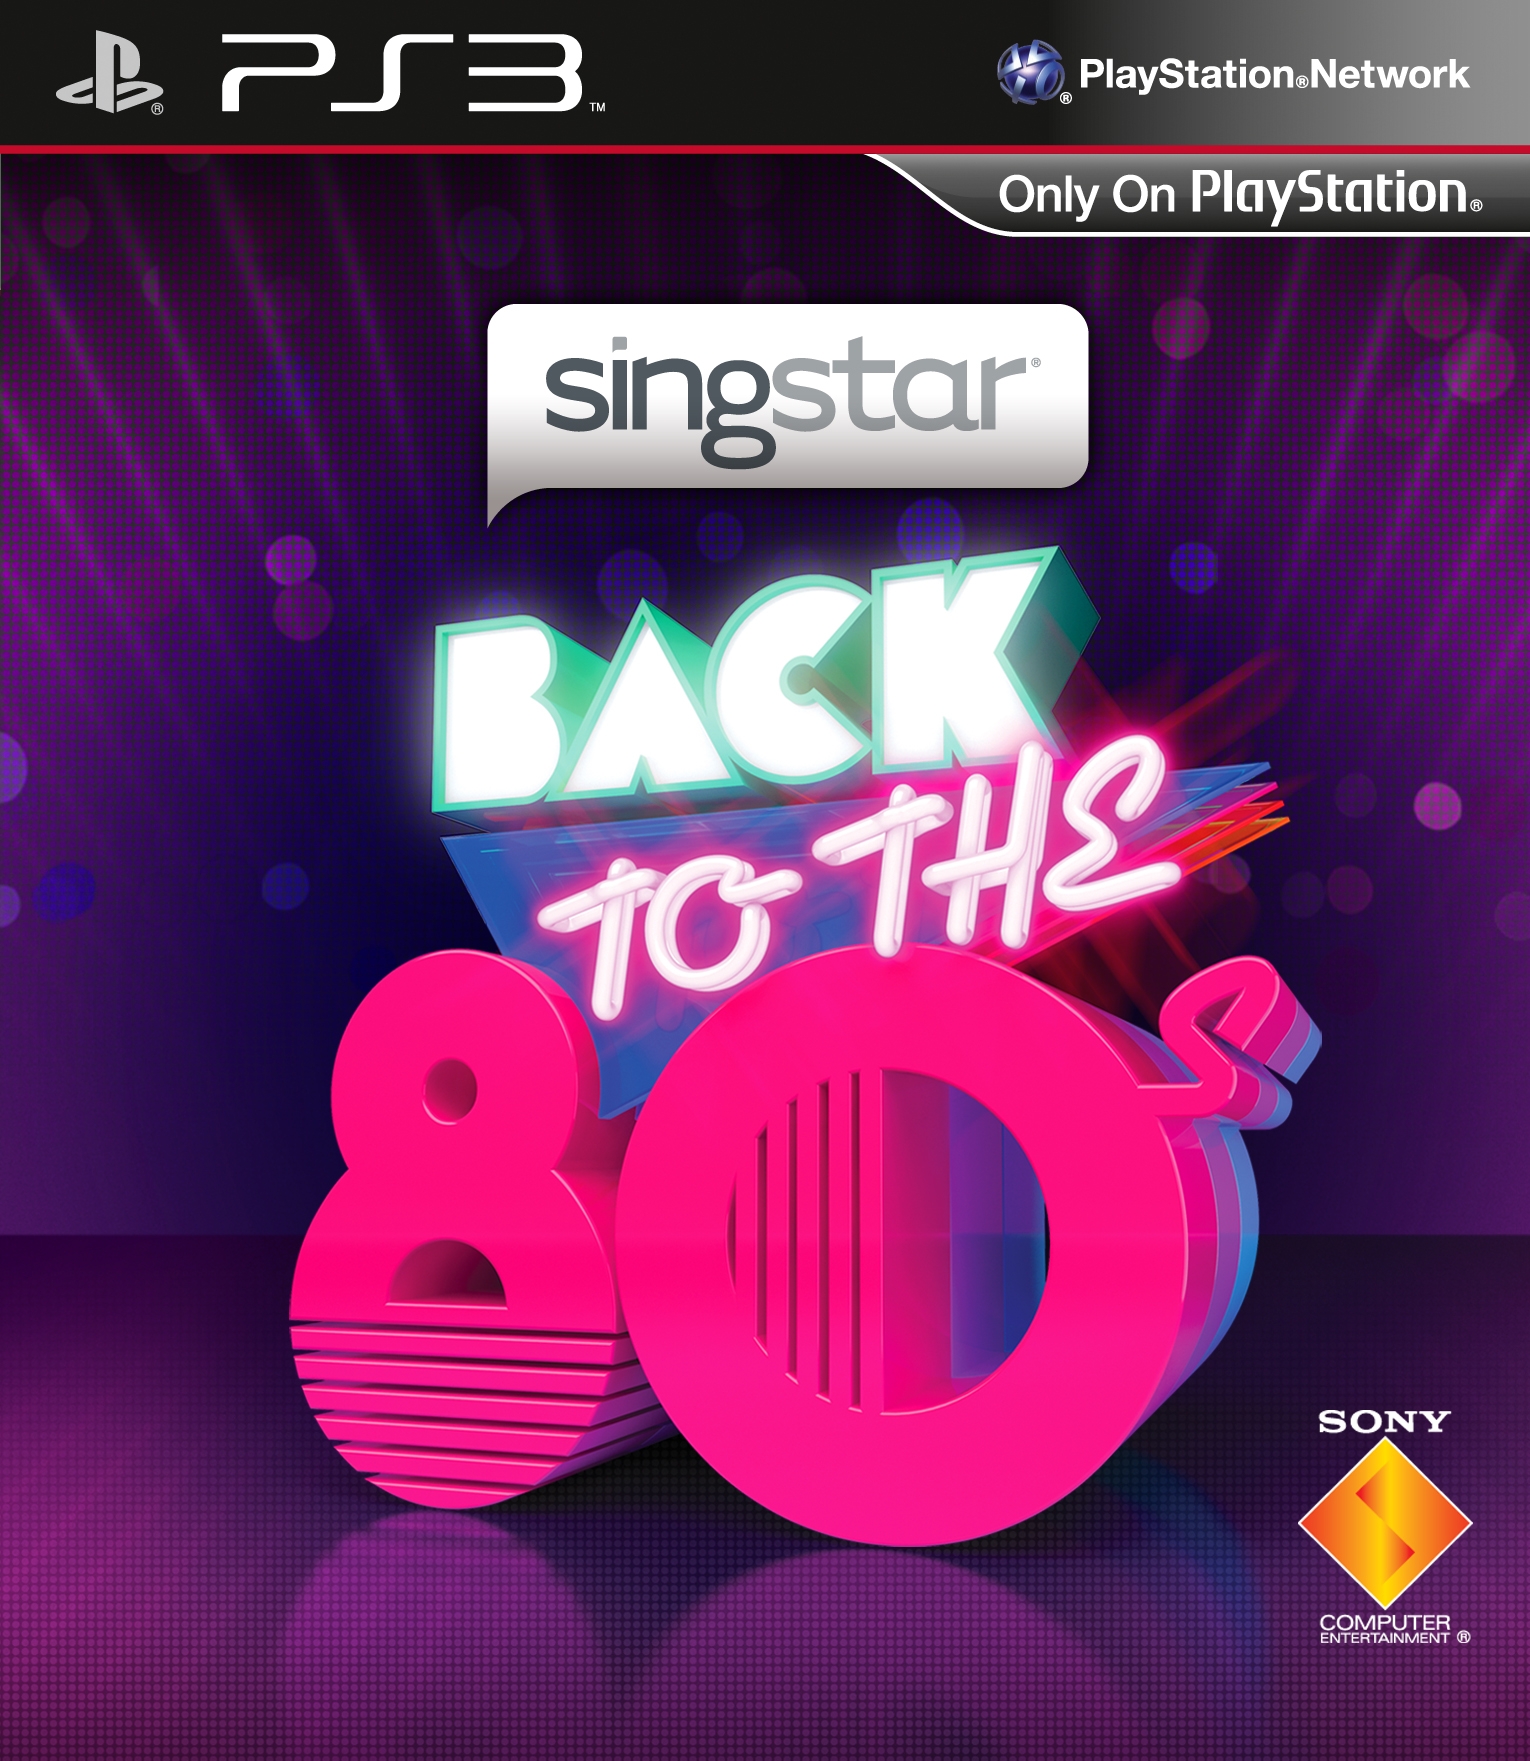 SingStar: Back to the 80's